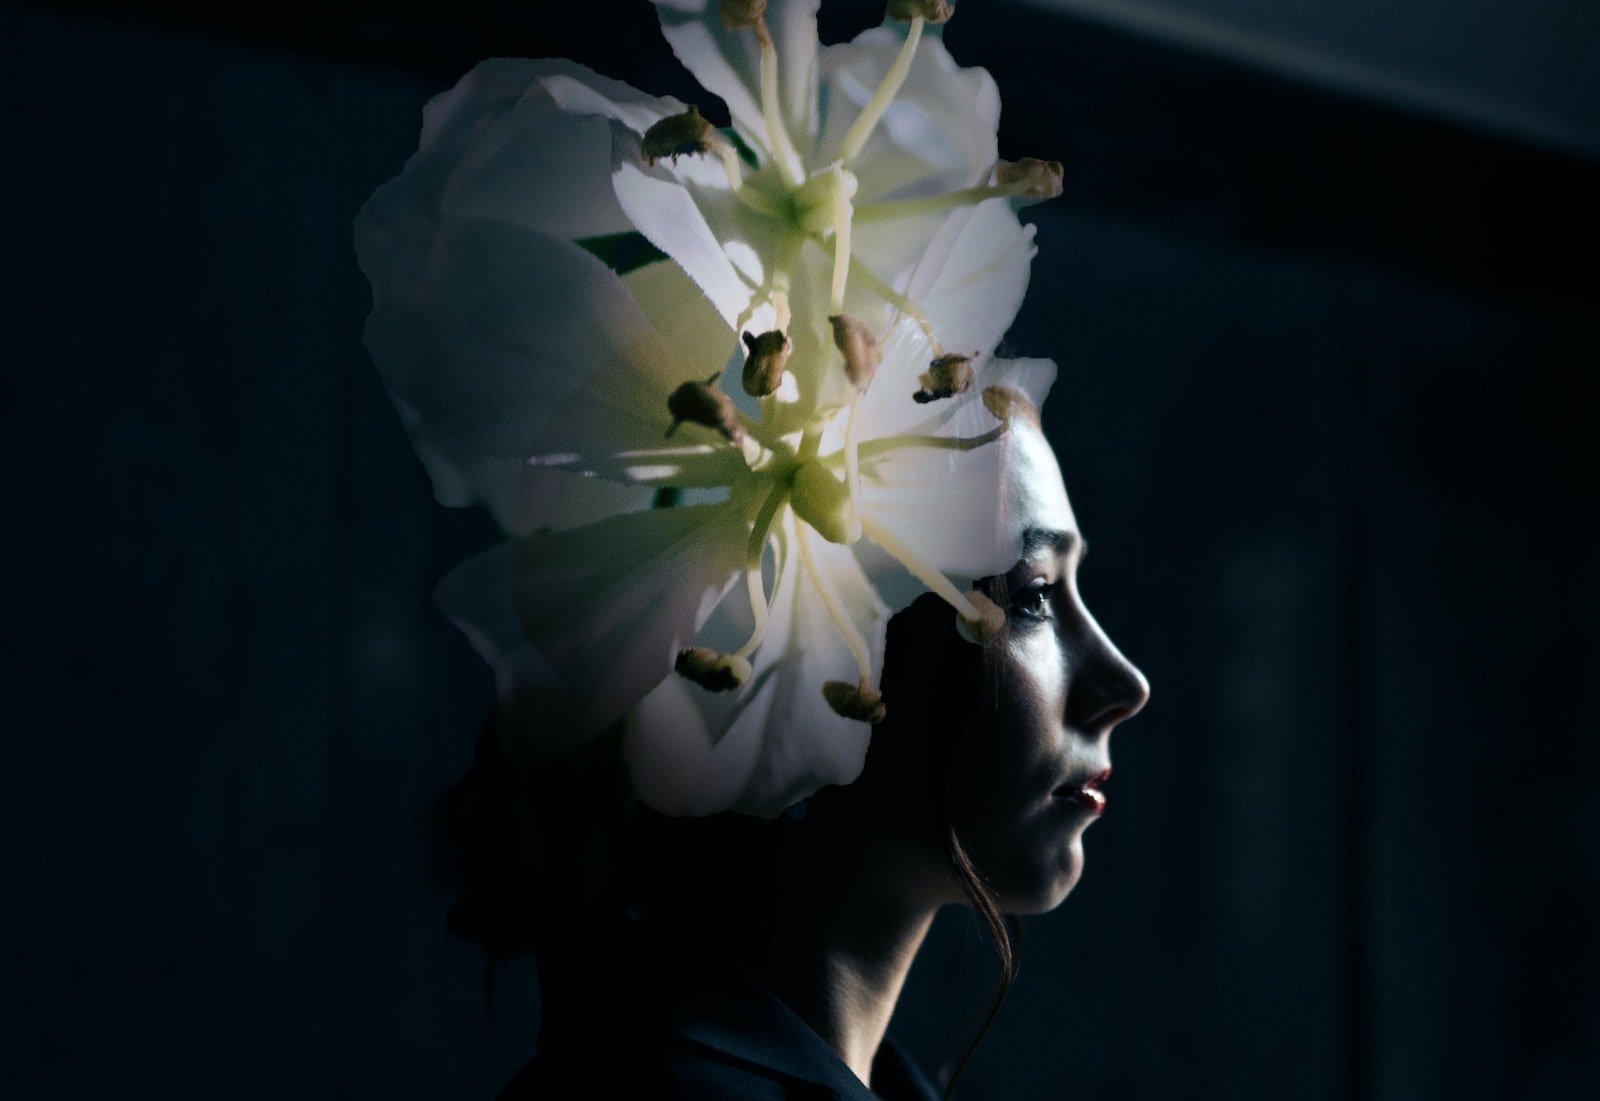 Masha Rayners/Pexels https://www.pexels.com/photo/woman-covering-head-with-delicate-flowers-5437357/